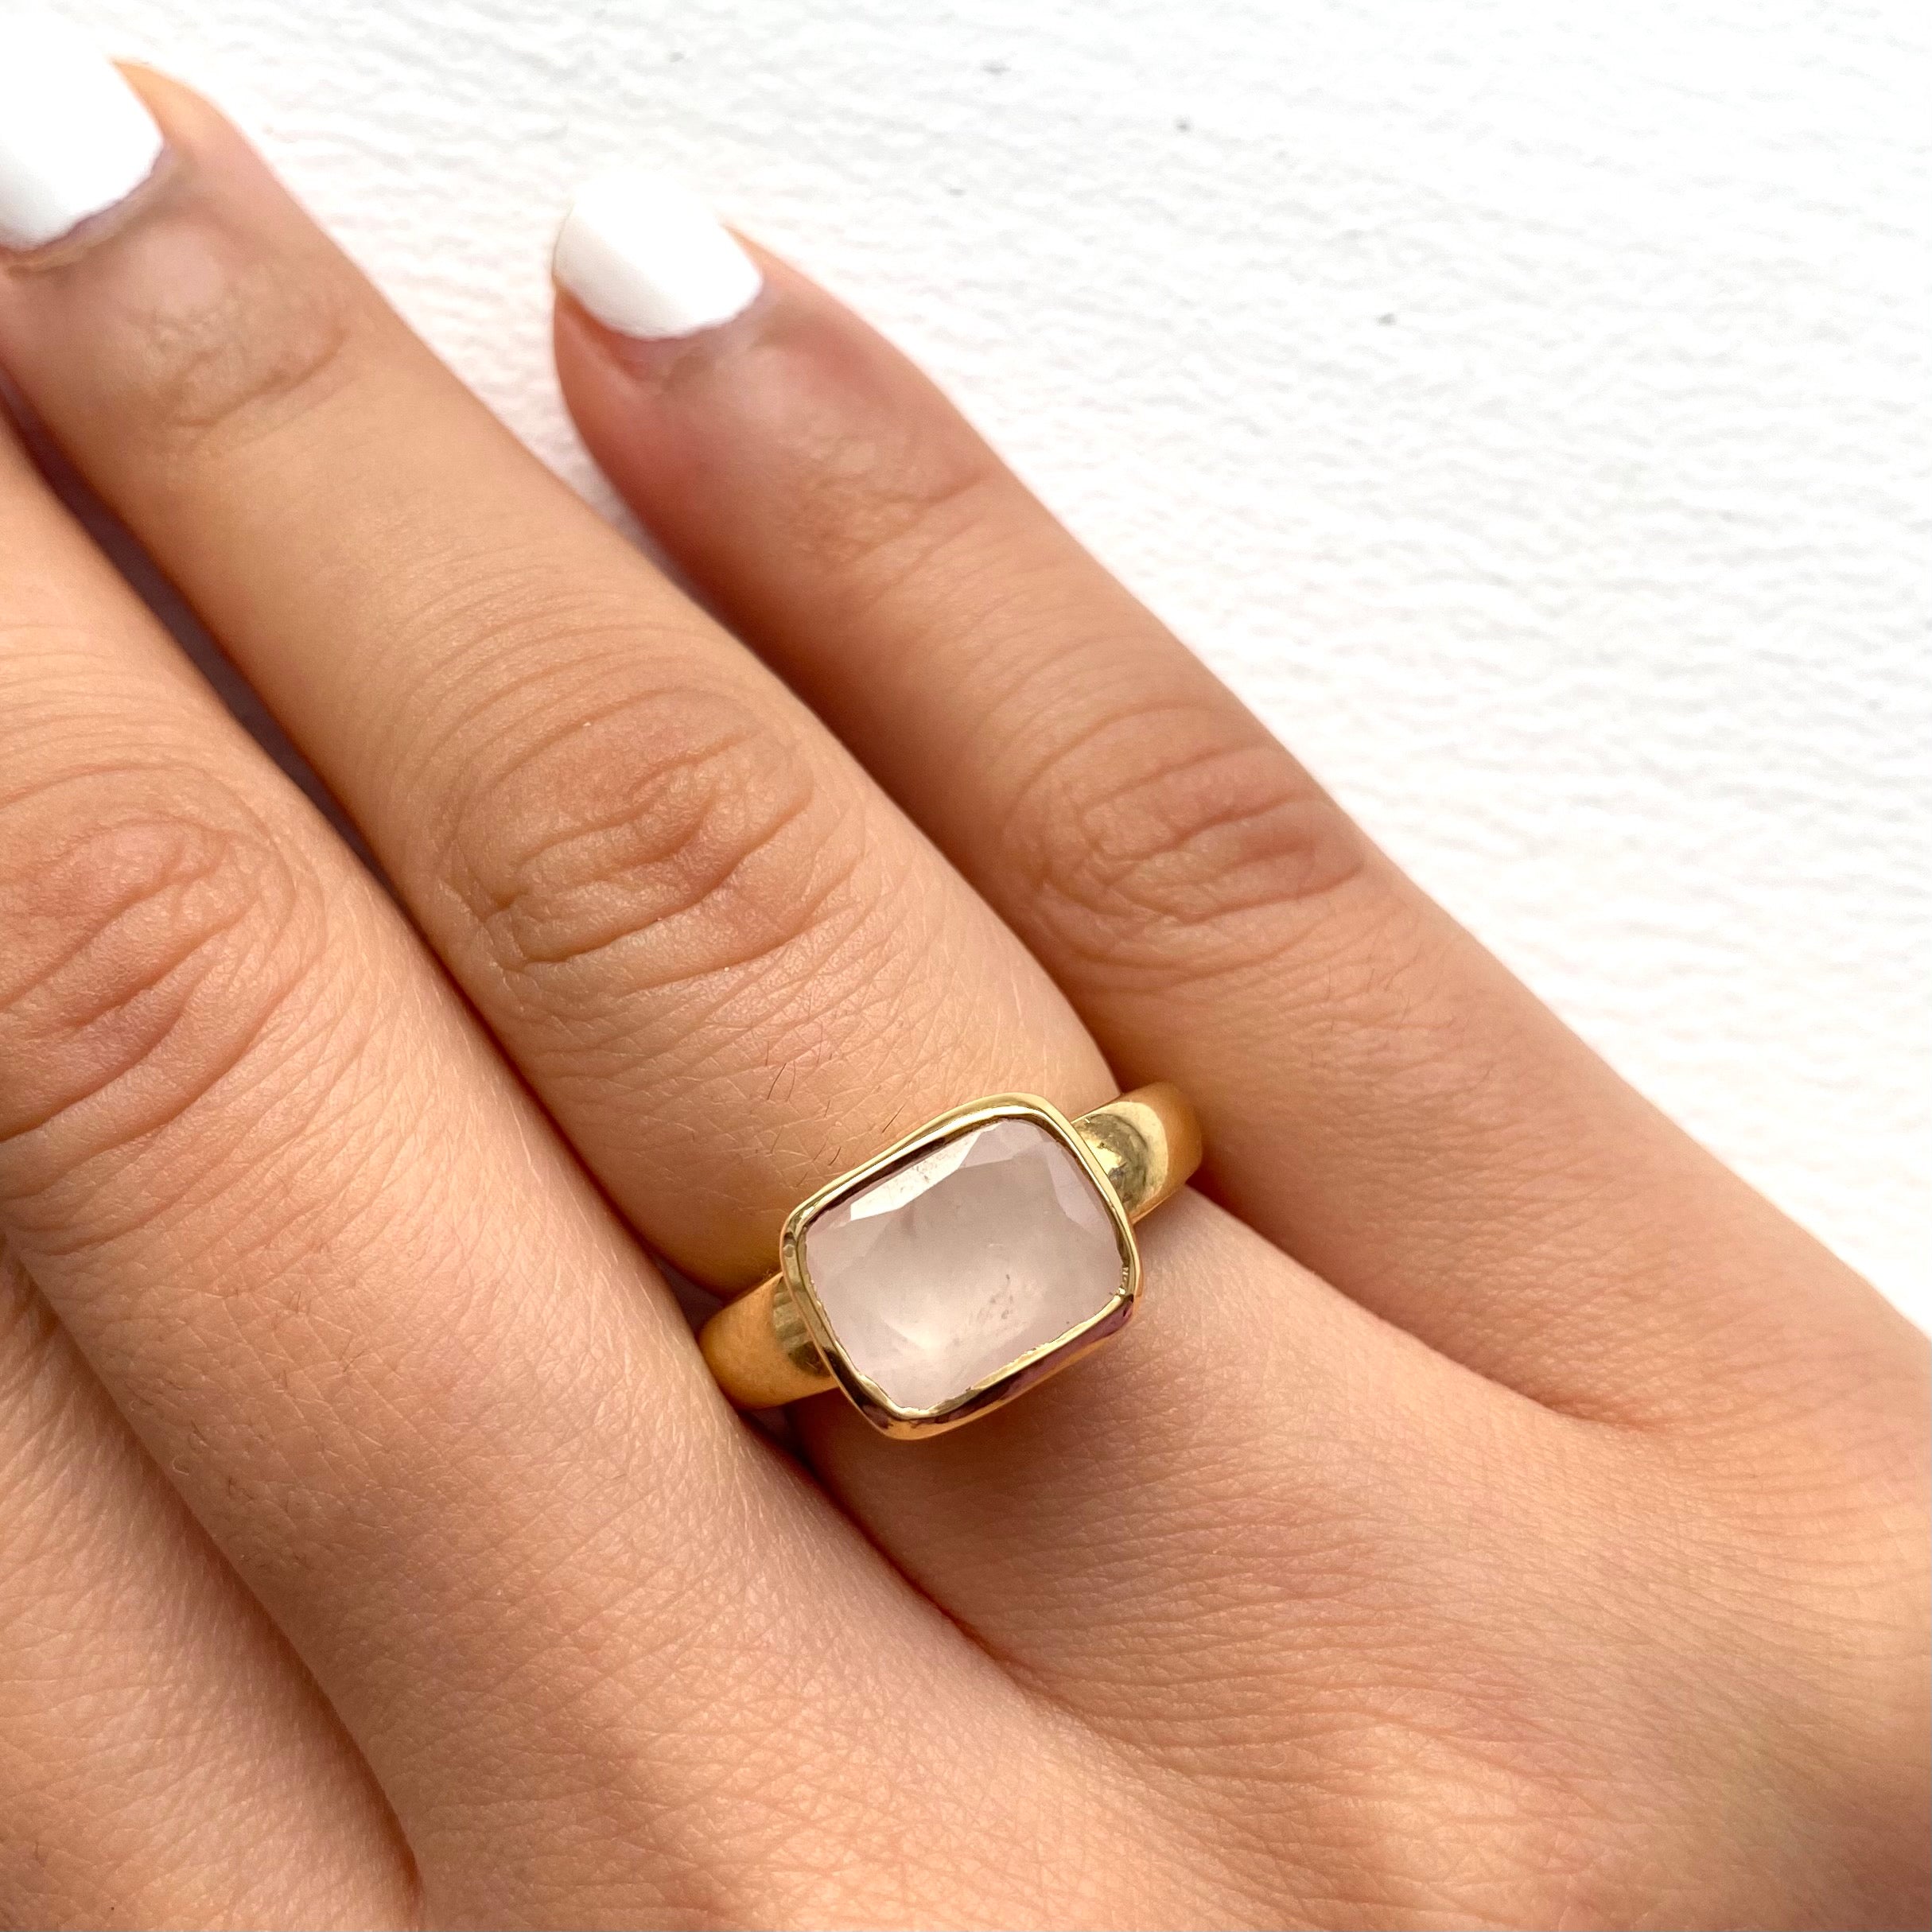 Faceted Rectangular Cut Natural Gemstone Gold Plated Sterling Silver Ring - Rose Quartz